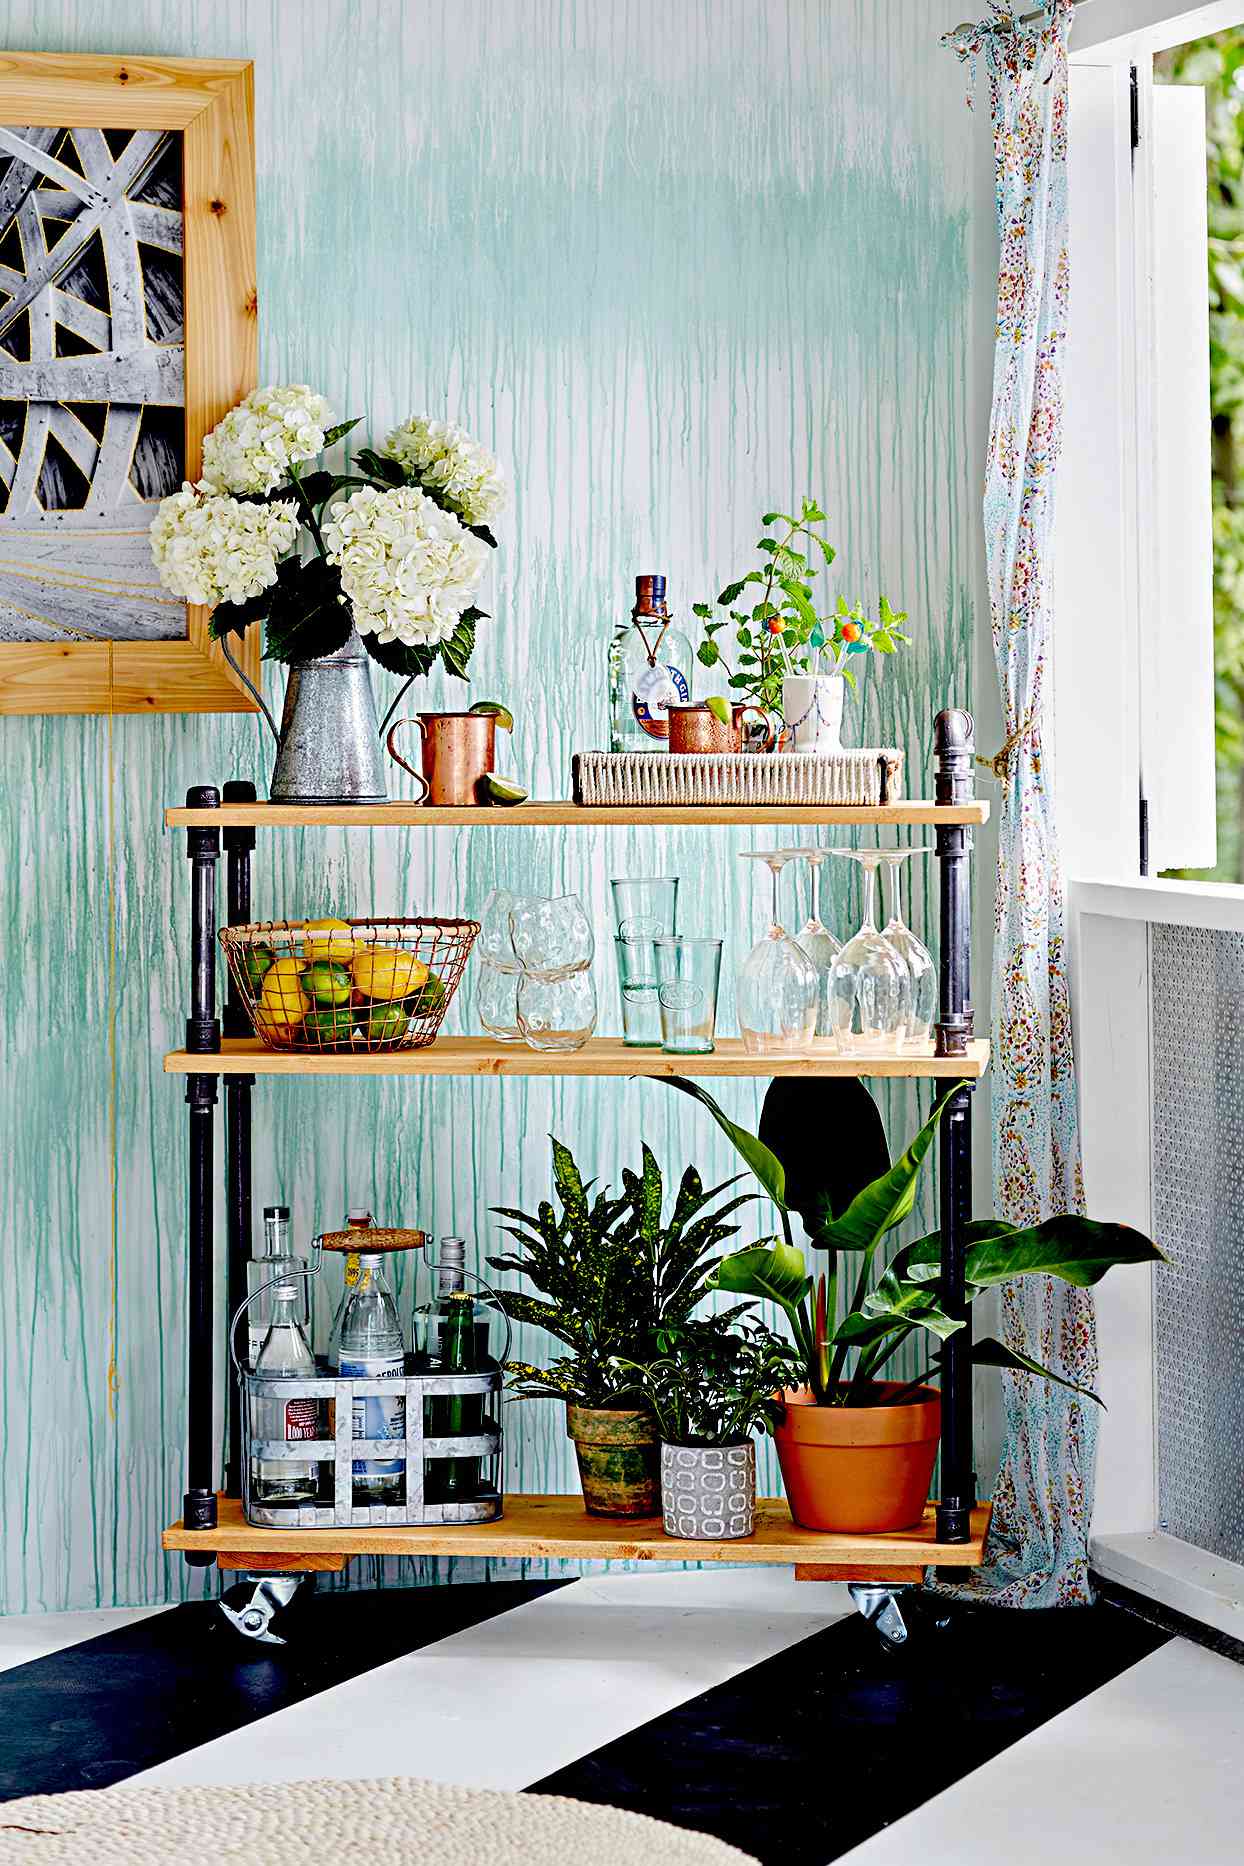 This Diy Bar Cart Is A Must